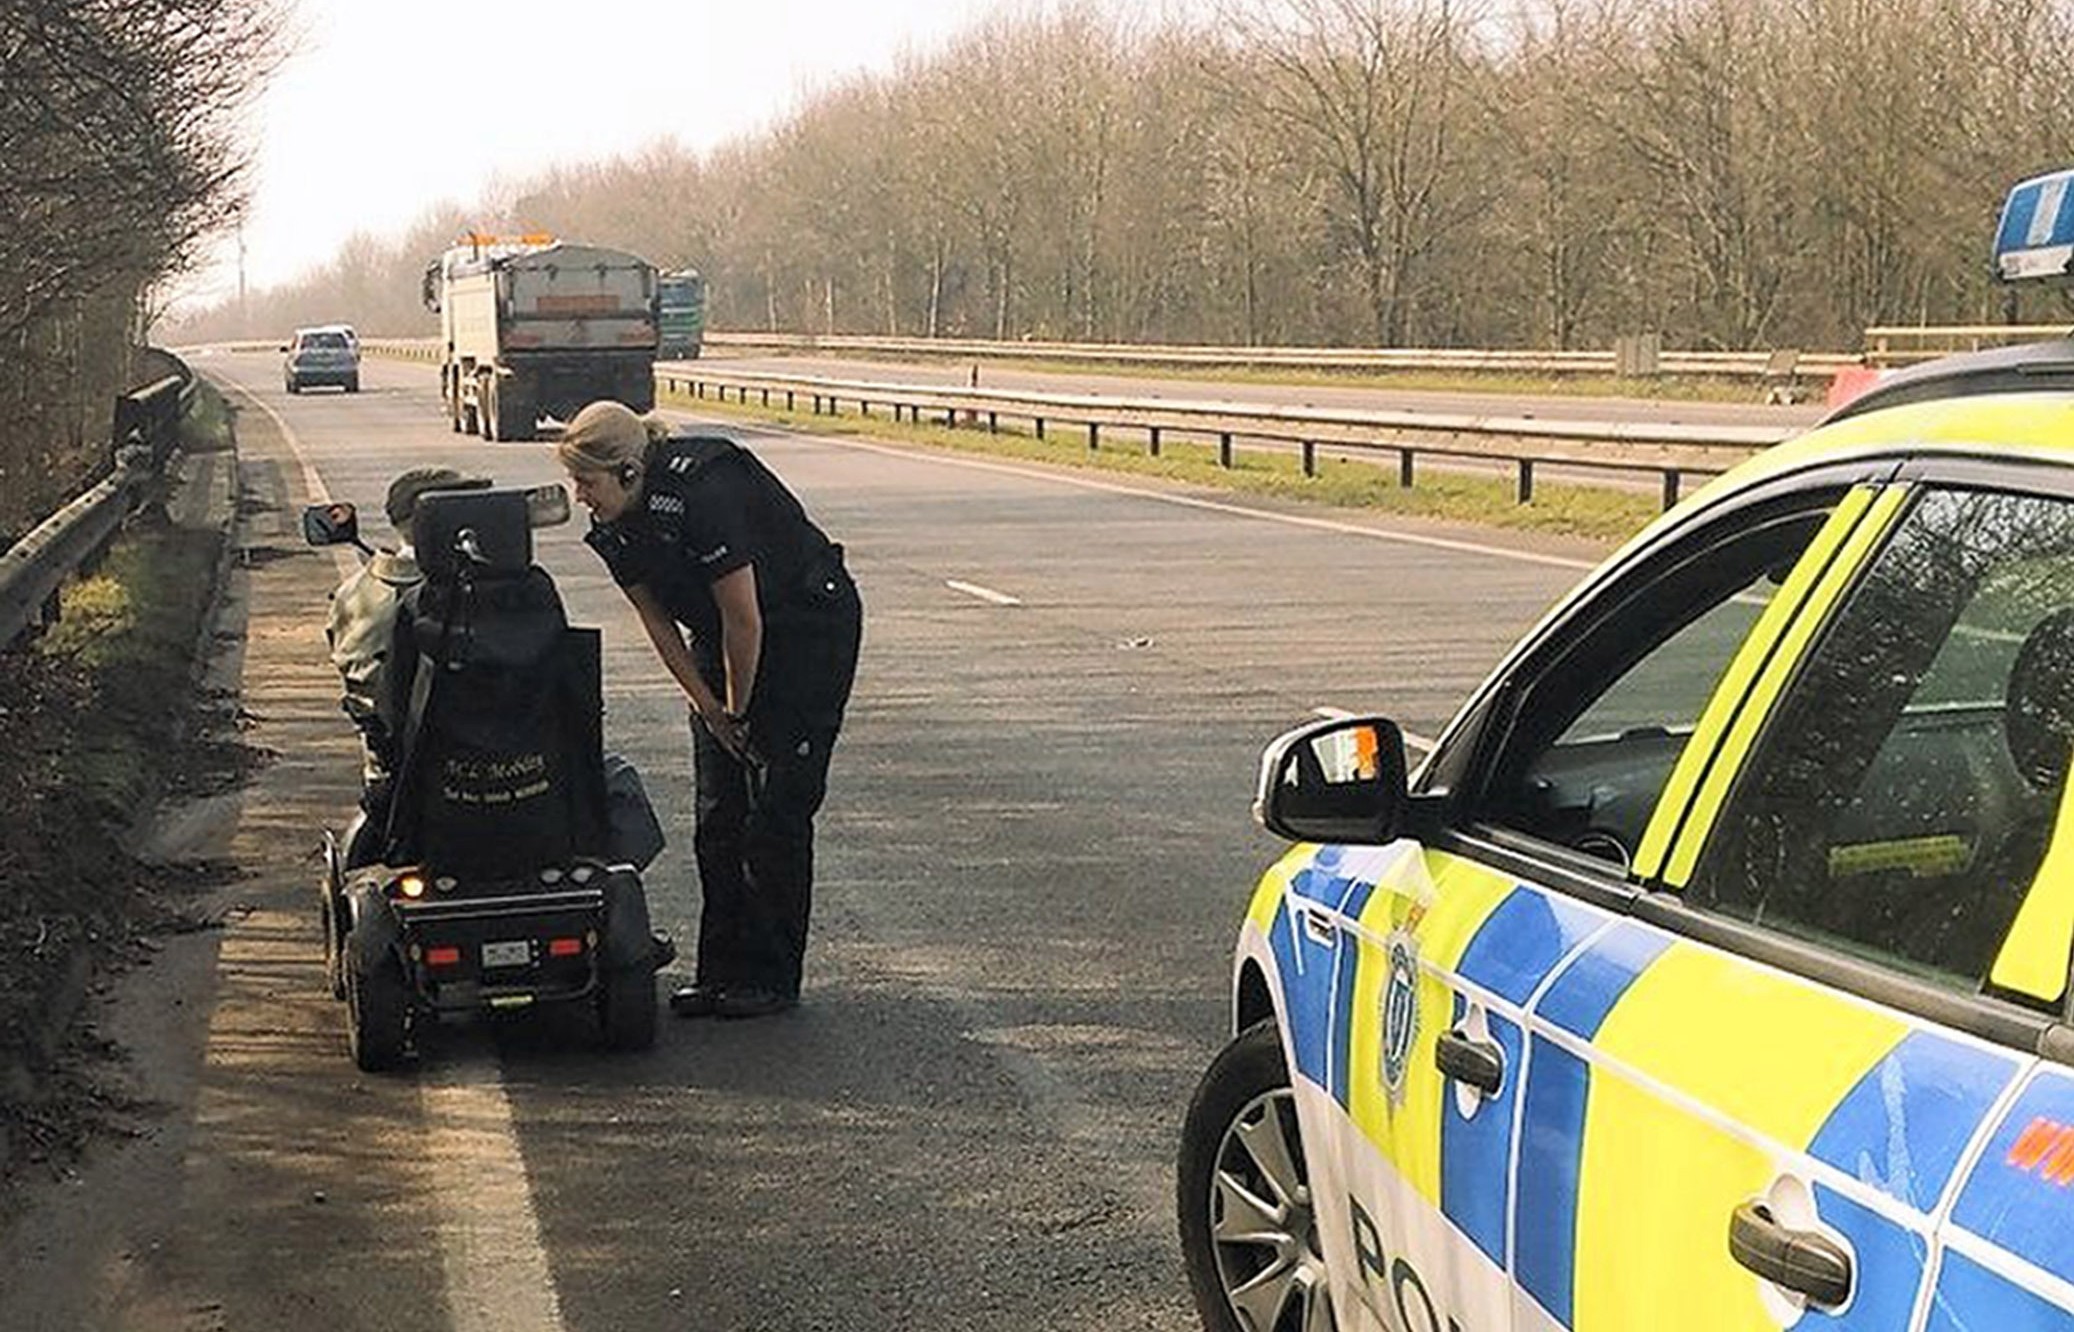 Police Officer Katie Breeds speaking to a  'very confused' 92-year-old man who found himself on his mobility scooter on the busy A2011 near Crawley, West Sussex after taking a wrong turn.